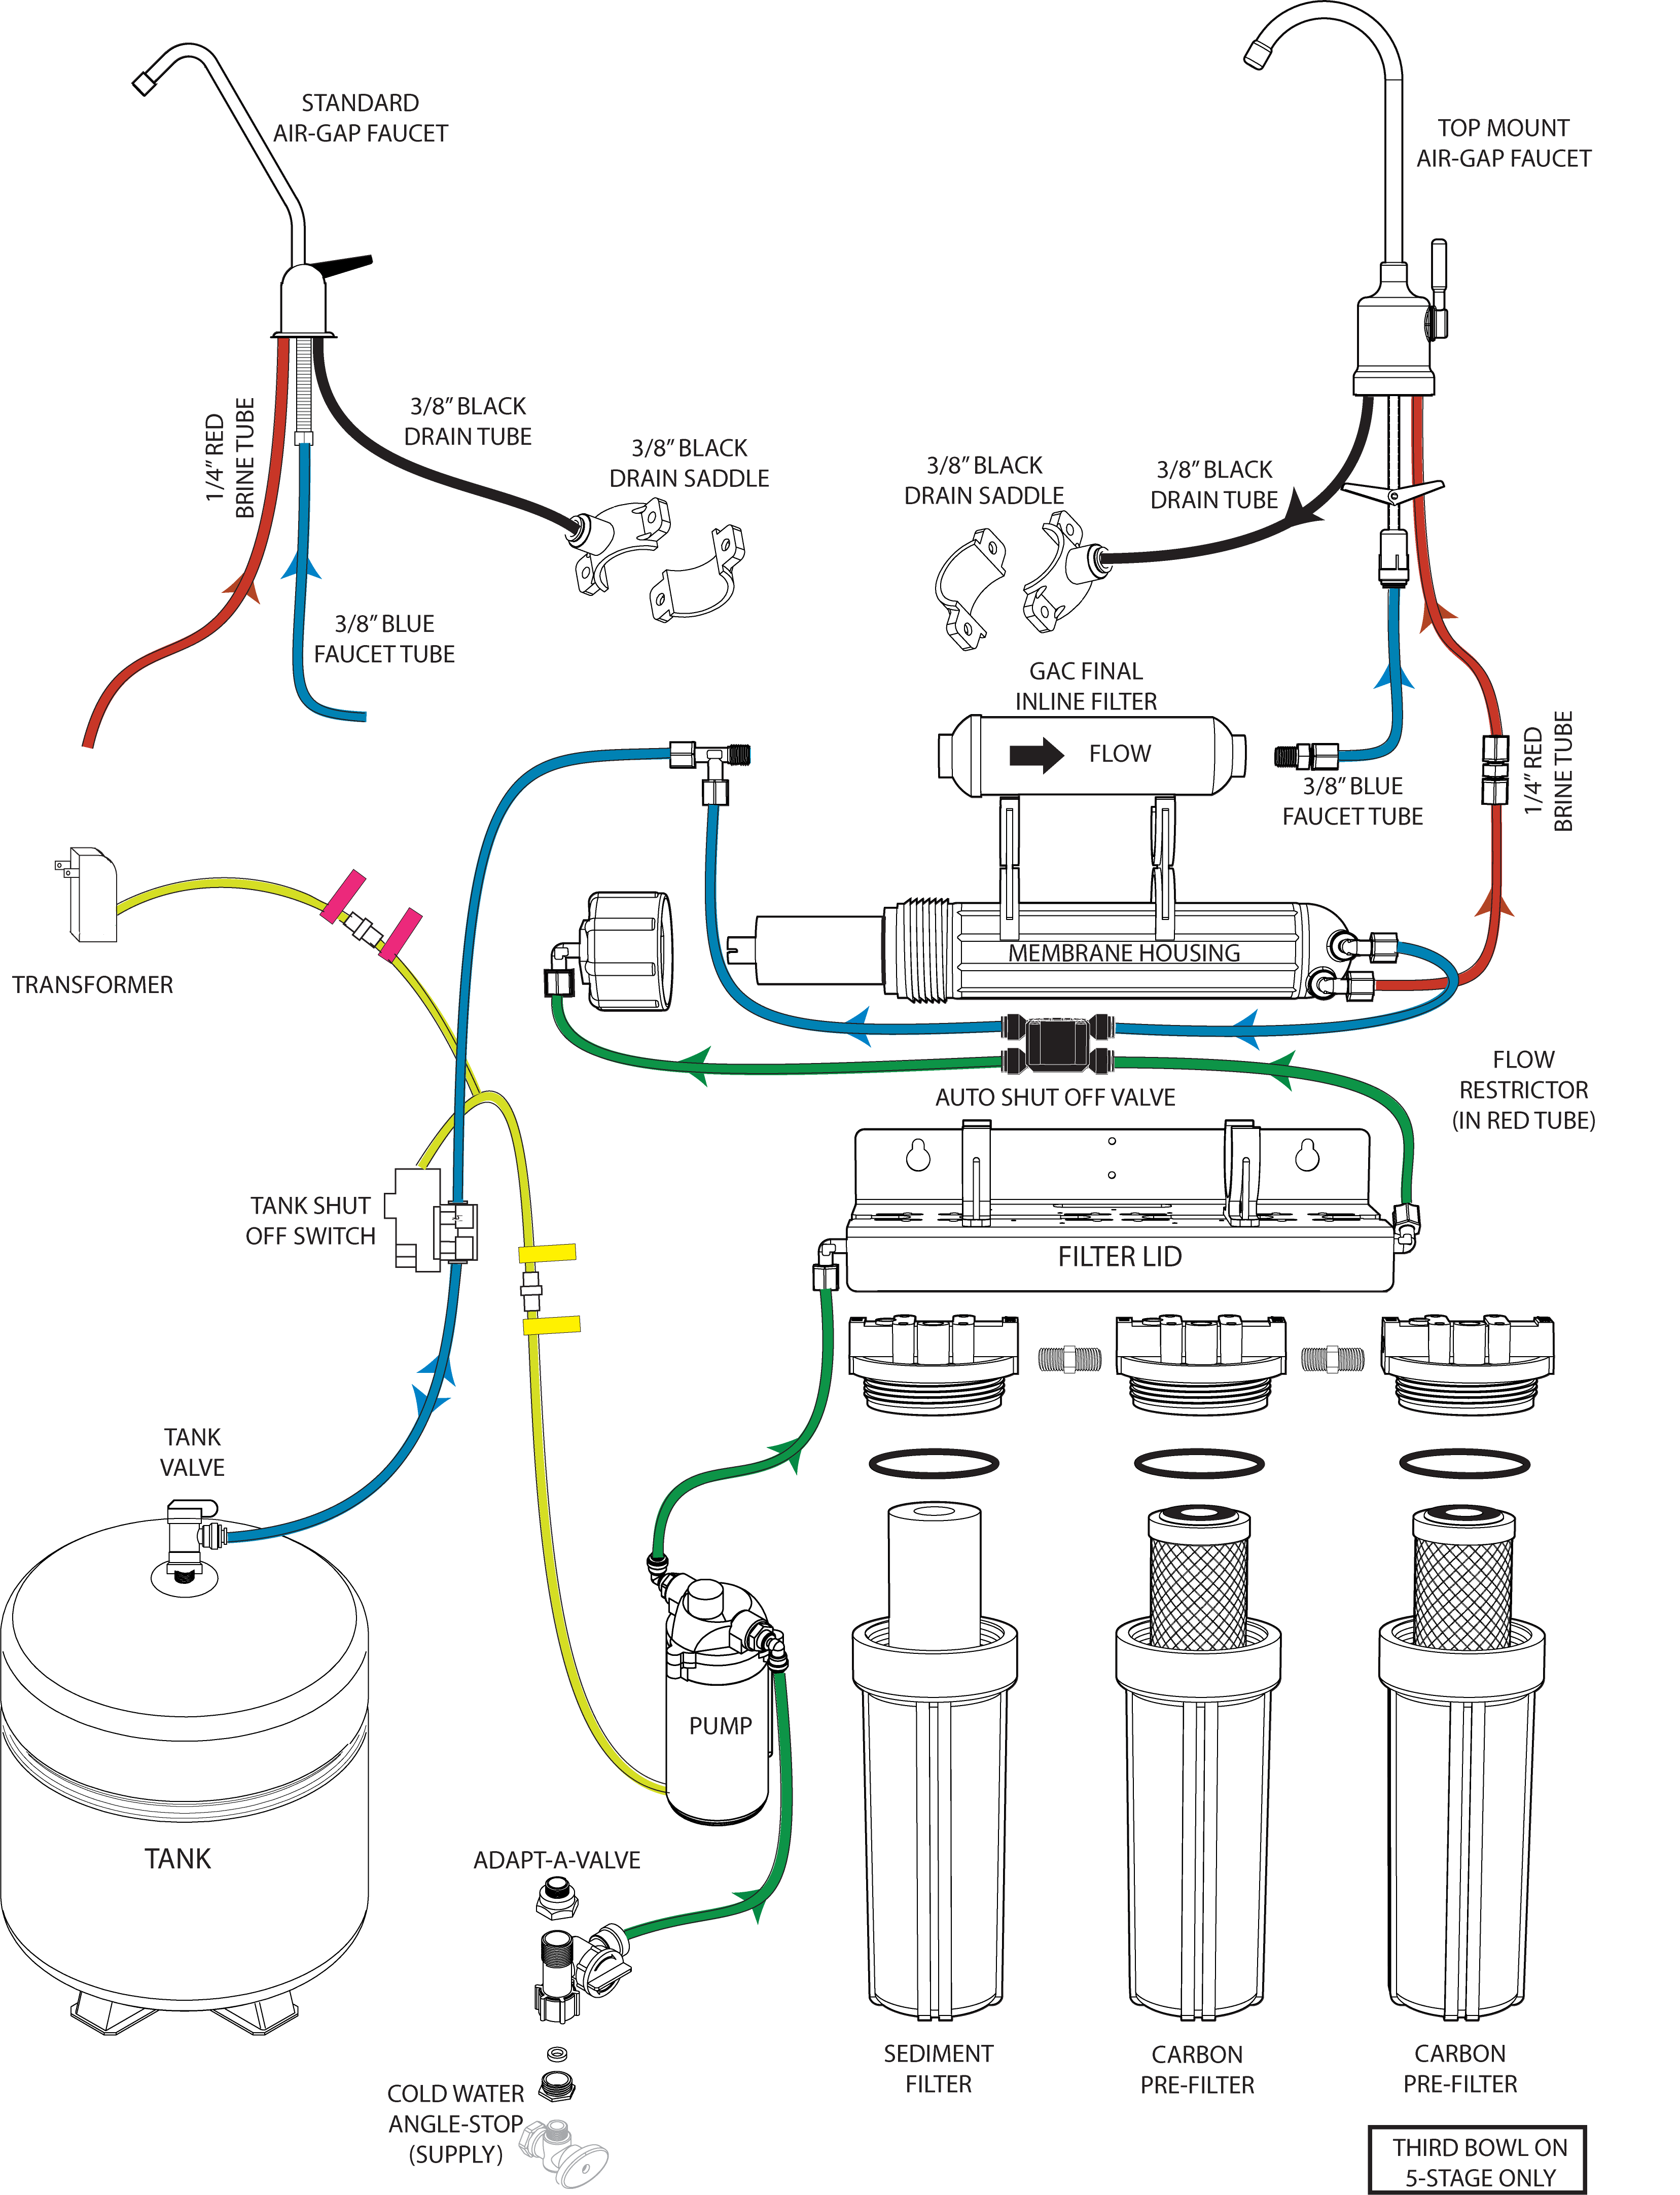 [DIAGRAM] Piping Diagram For Booster Pump - MYDIAGRAM.ONLINE